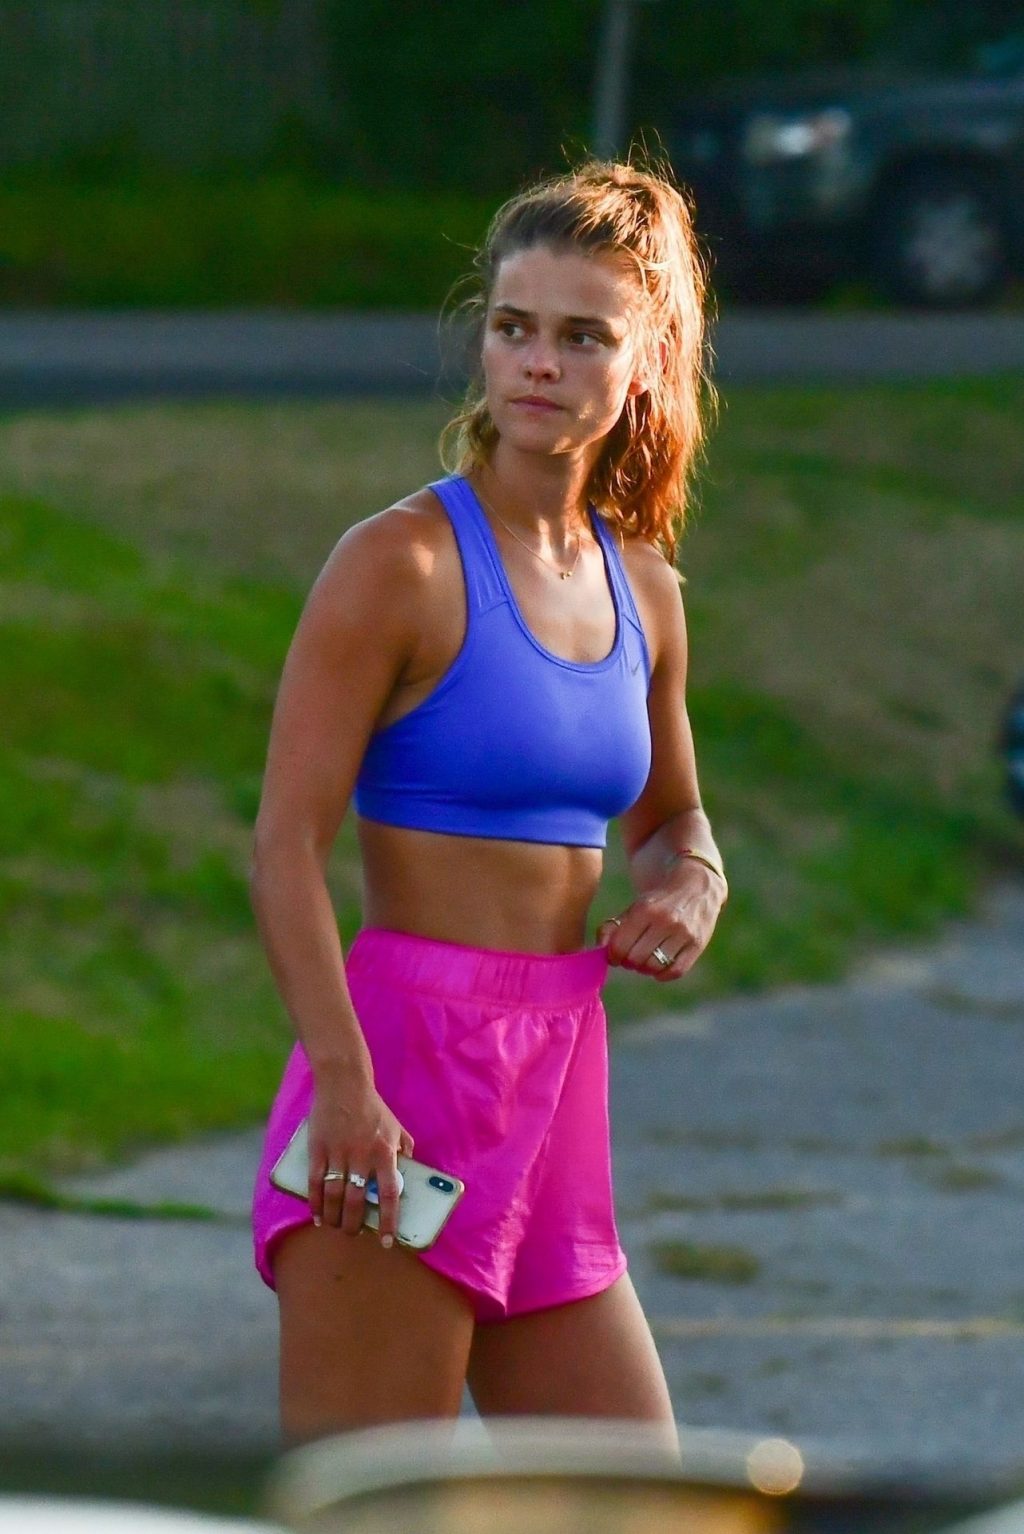 Nina Agdal &amp; Jack Brinkley-Cook Chat After Their Work Out (Photos)